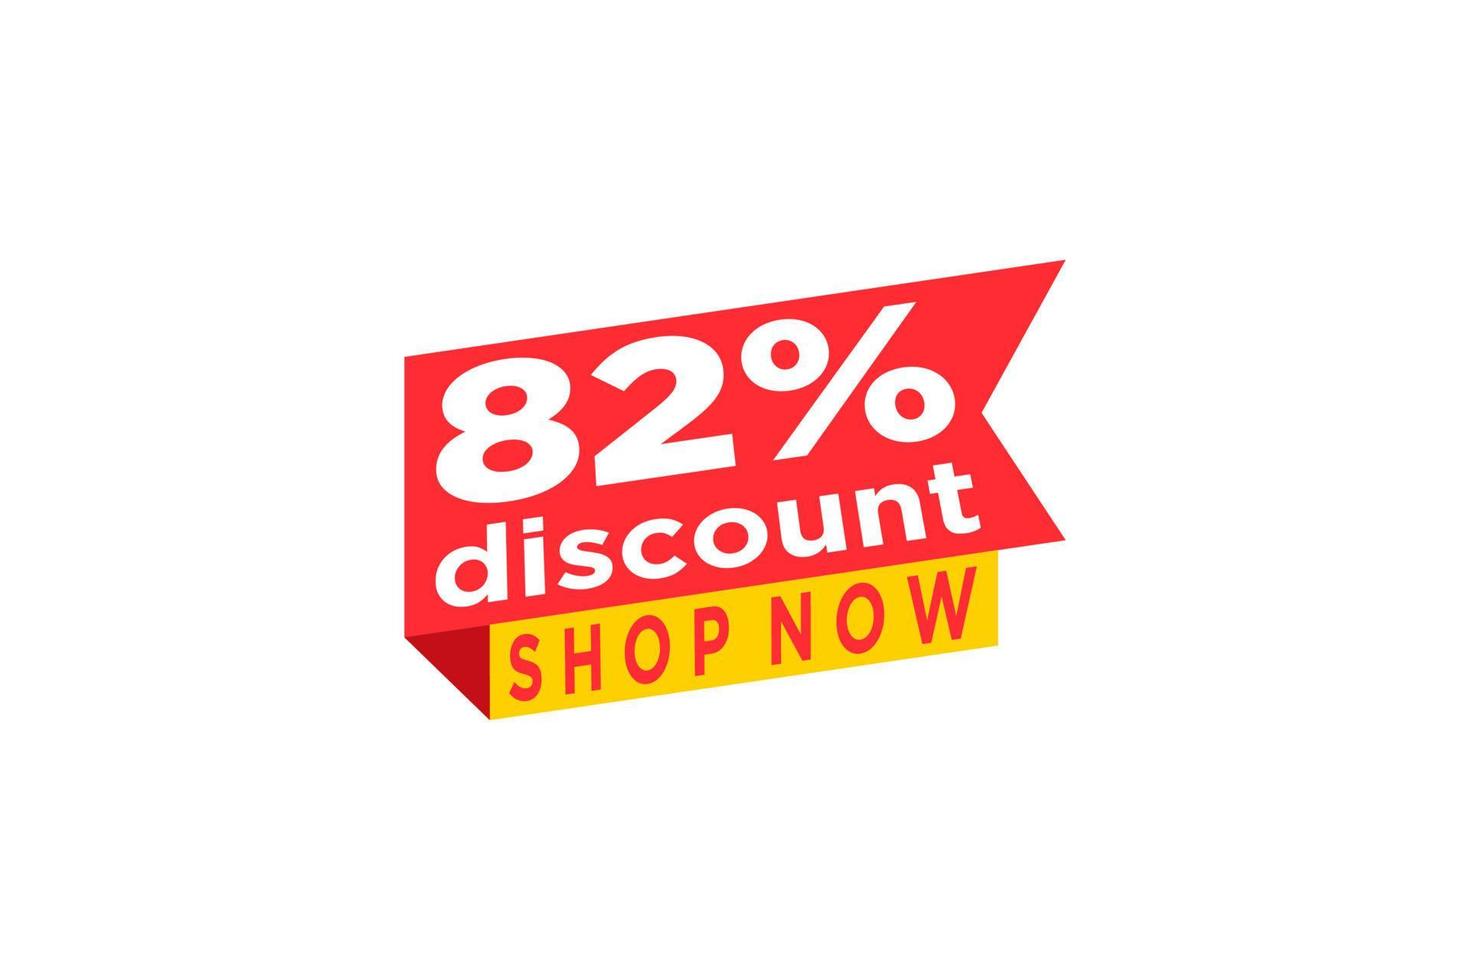 82 discount, Sales Vector badges for Labels, , Stickers, Banners, Tags, Web Stickers, New offer. Discount origami sign banner.